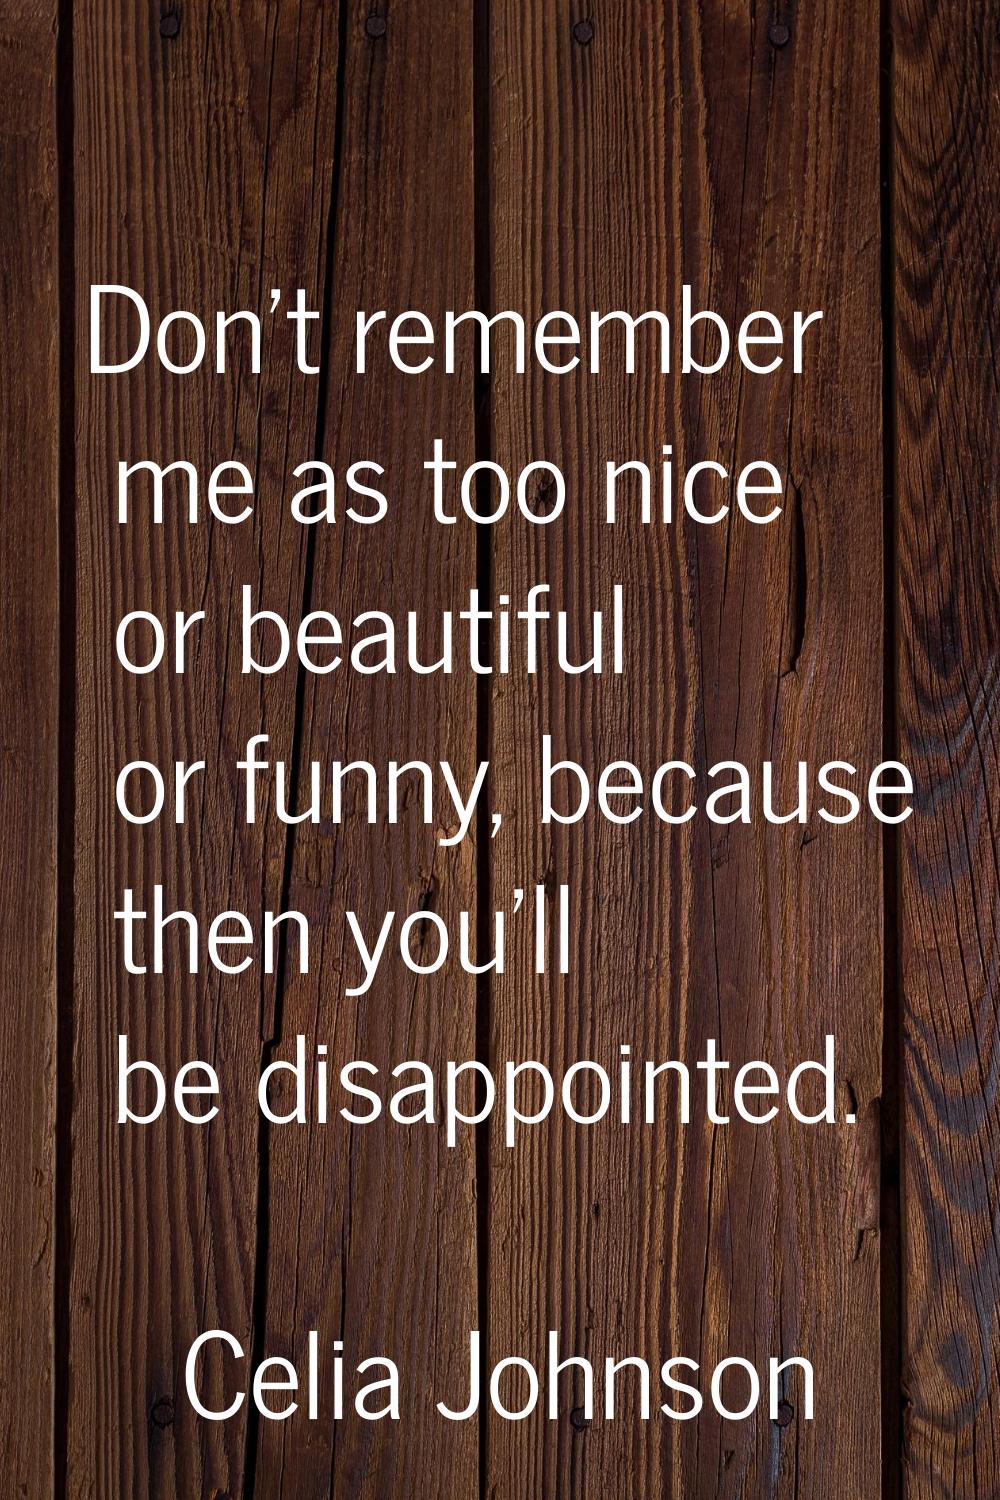 Don't remember me as too nice or beautiful or funny, because then you'll be disappointed.